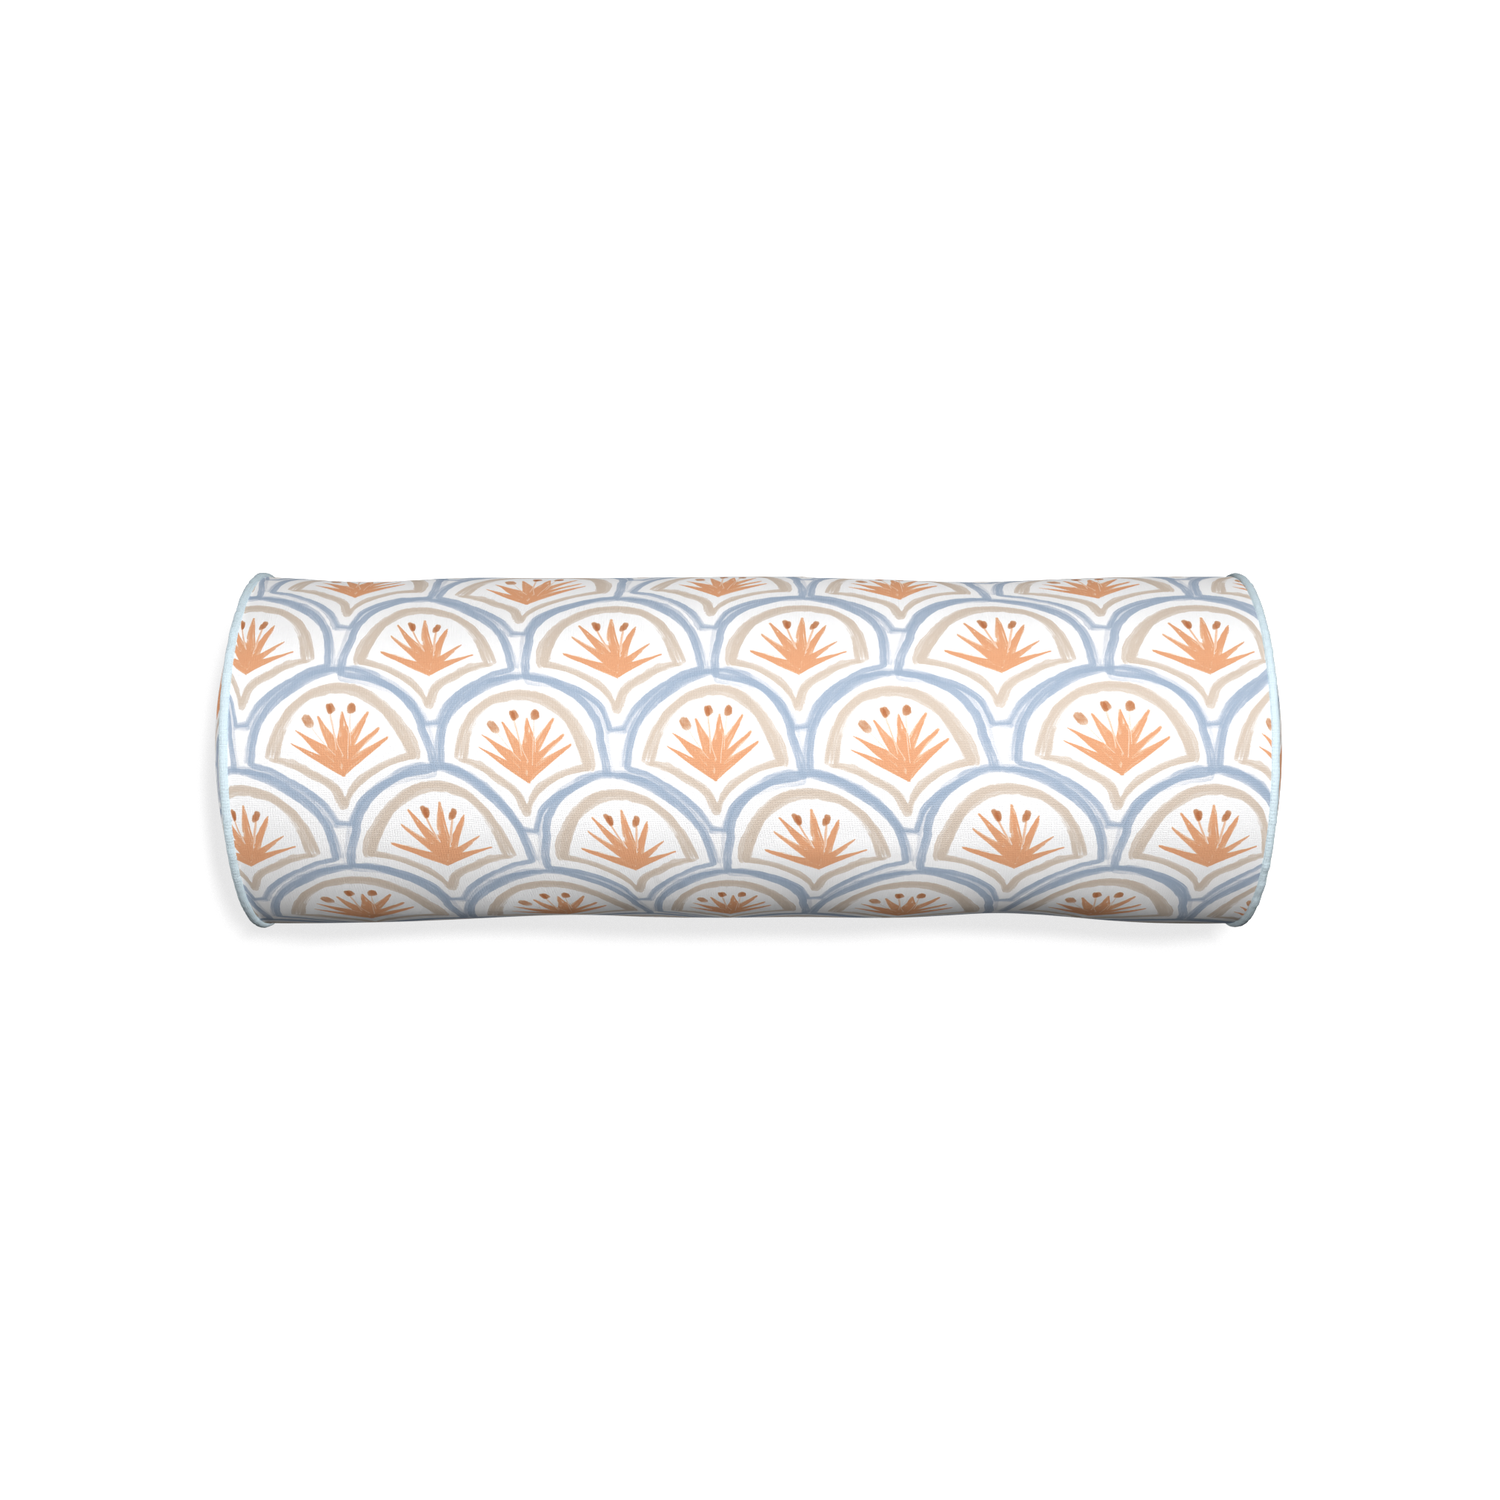 Bolster thatcher apricot custom art deco palm patternpillow with powder piping on white background